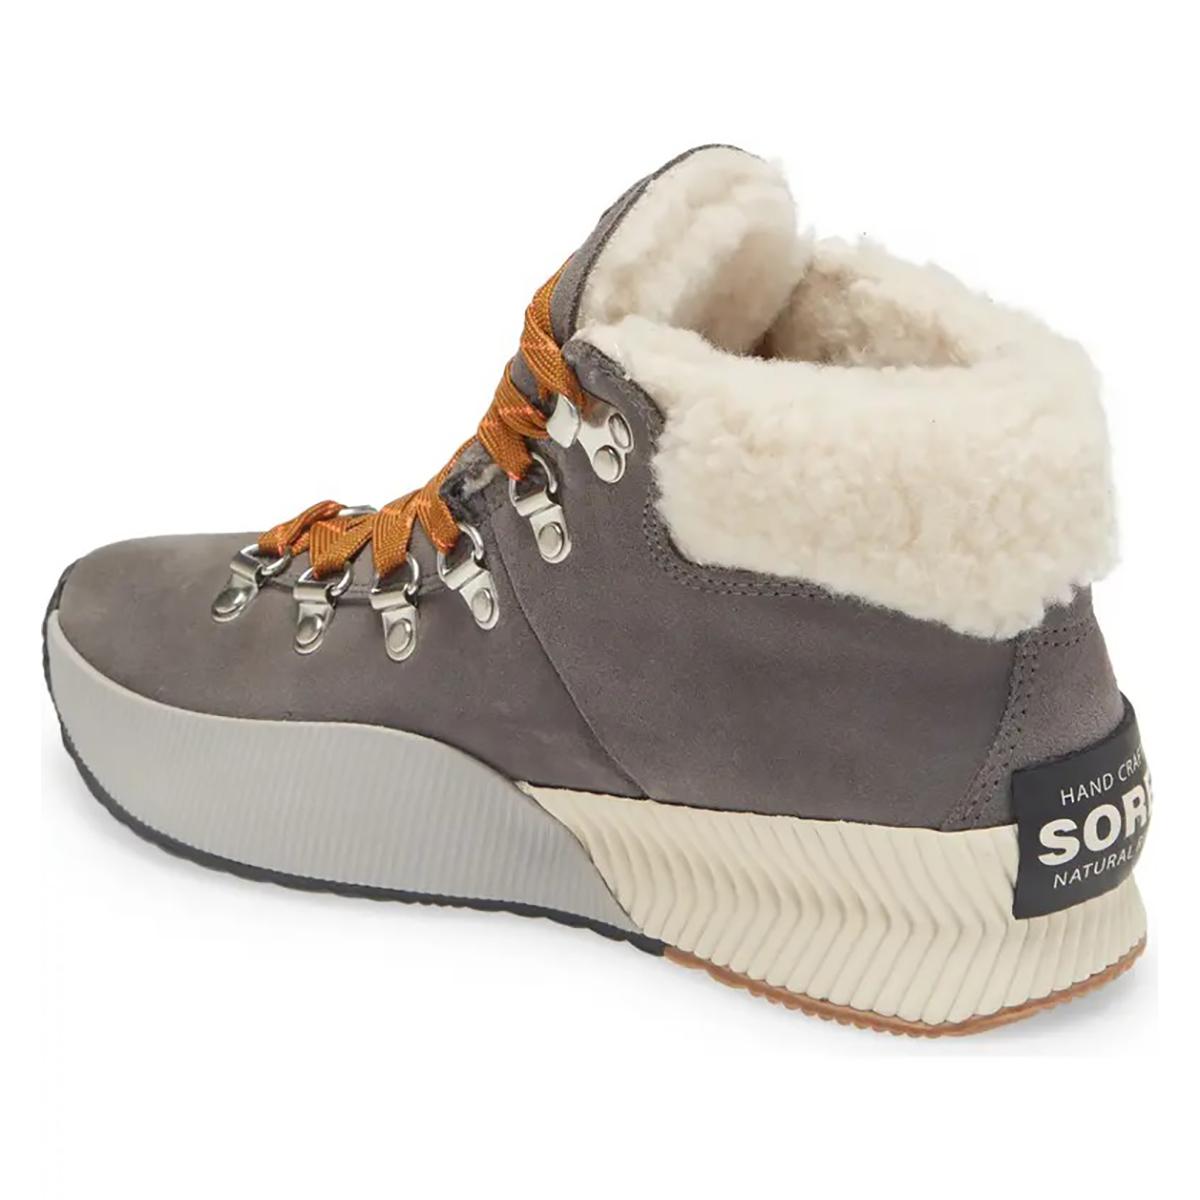 Sorel Out N About III Conquest Boot - Women's